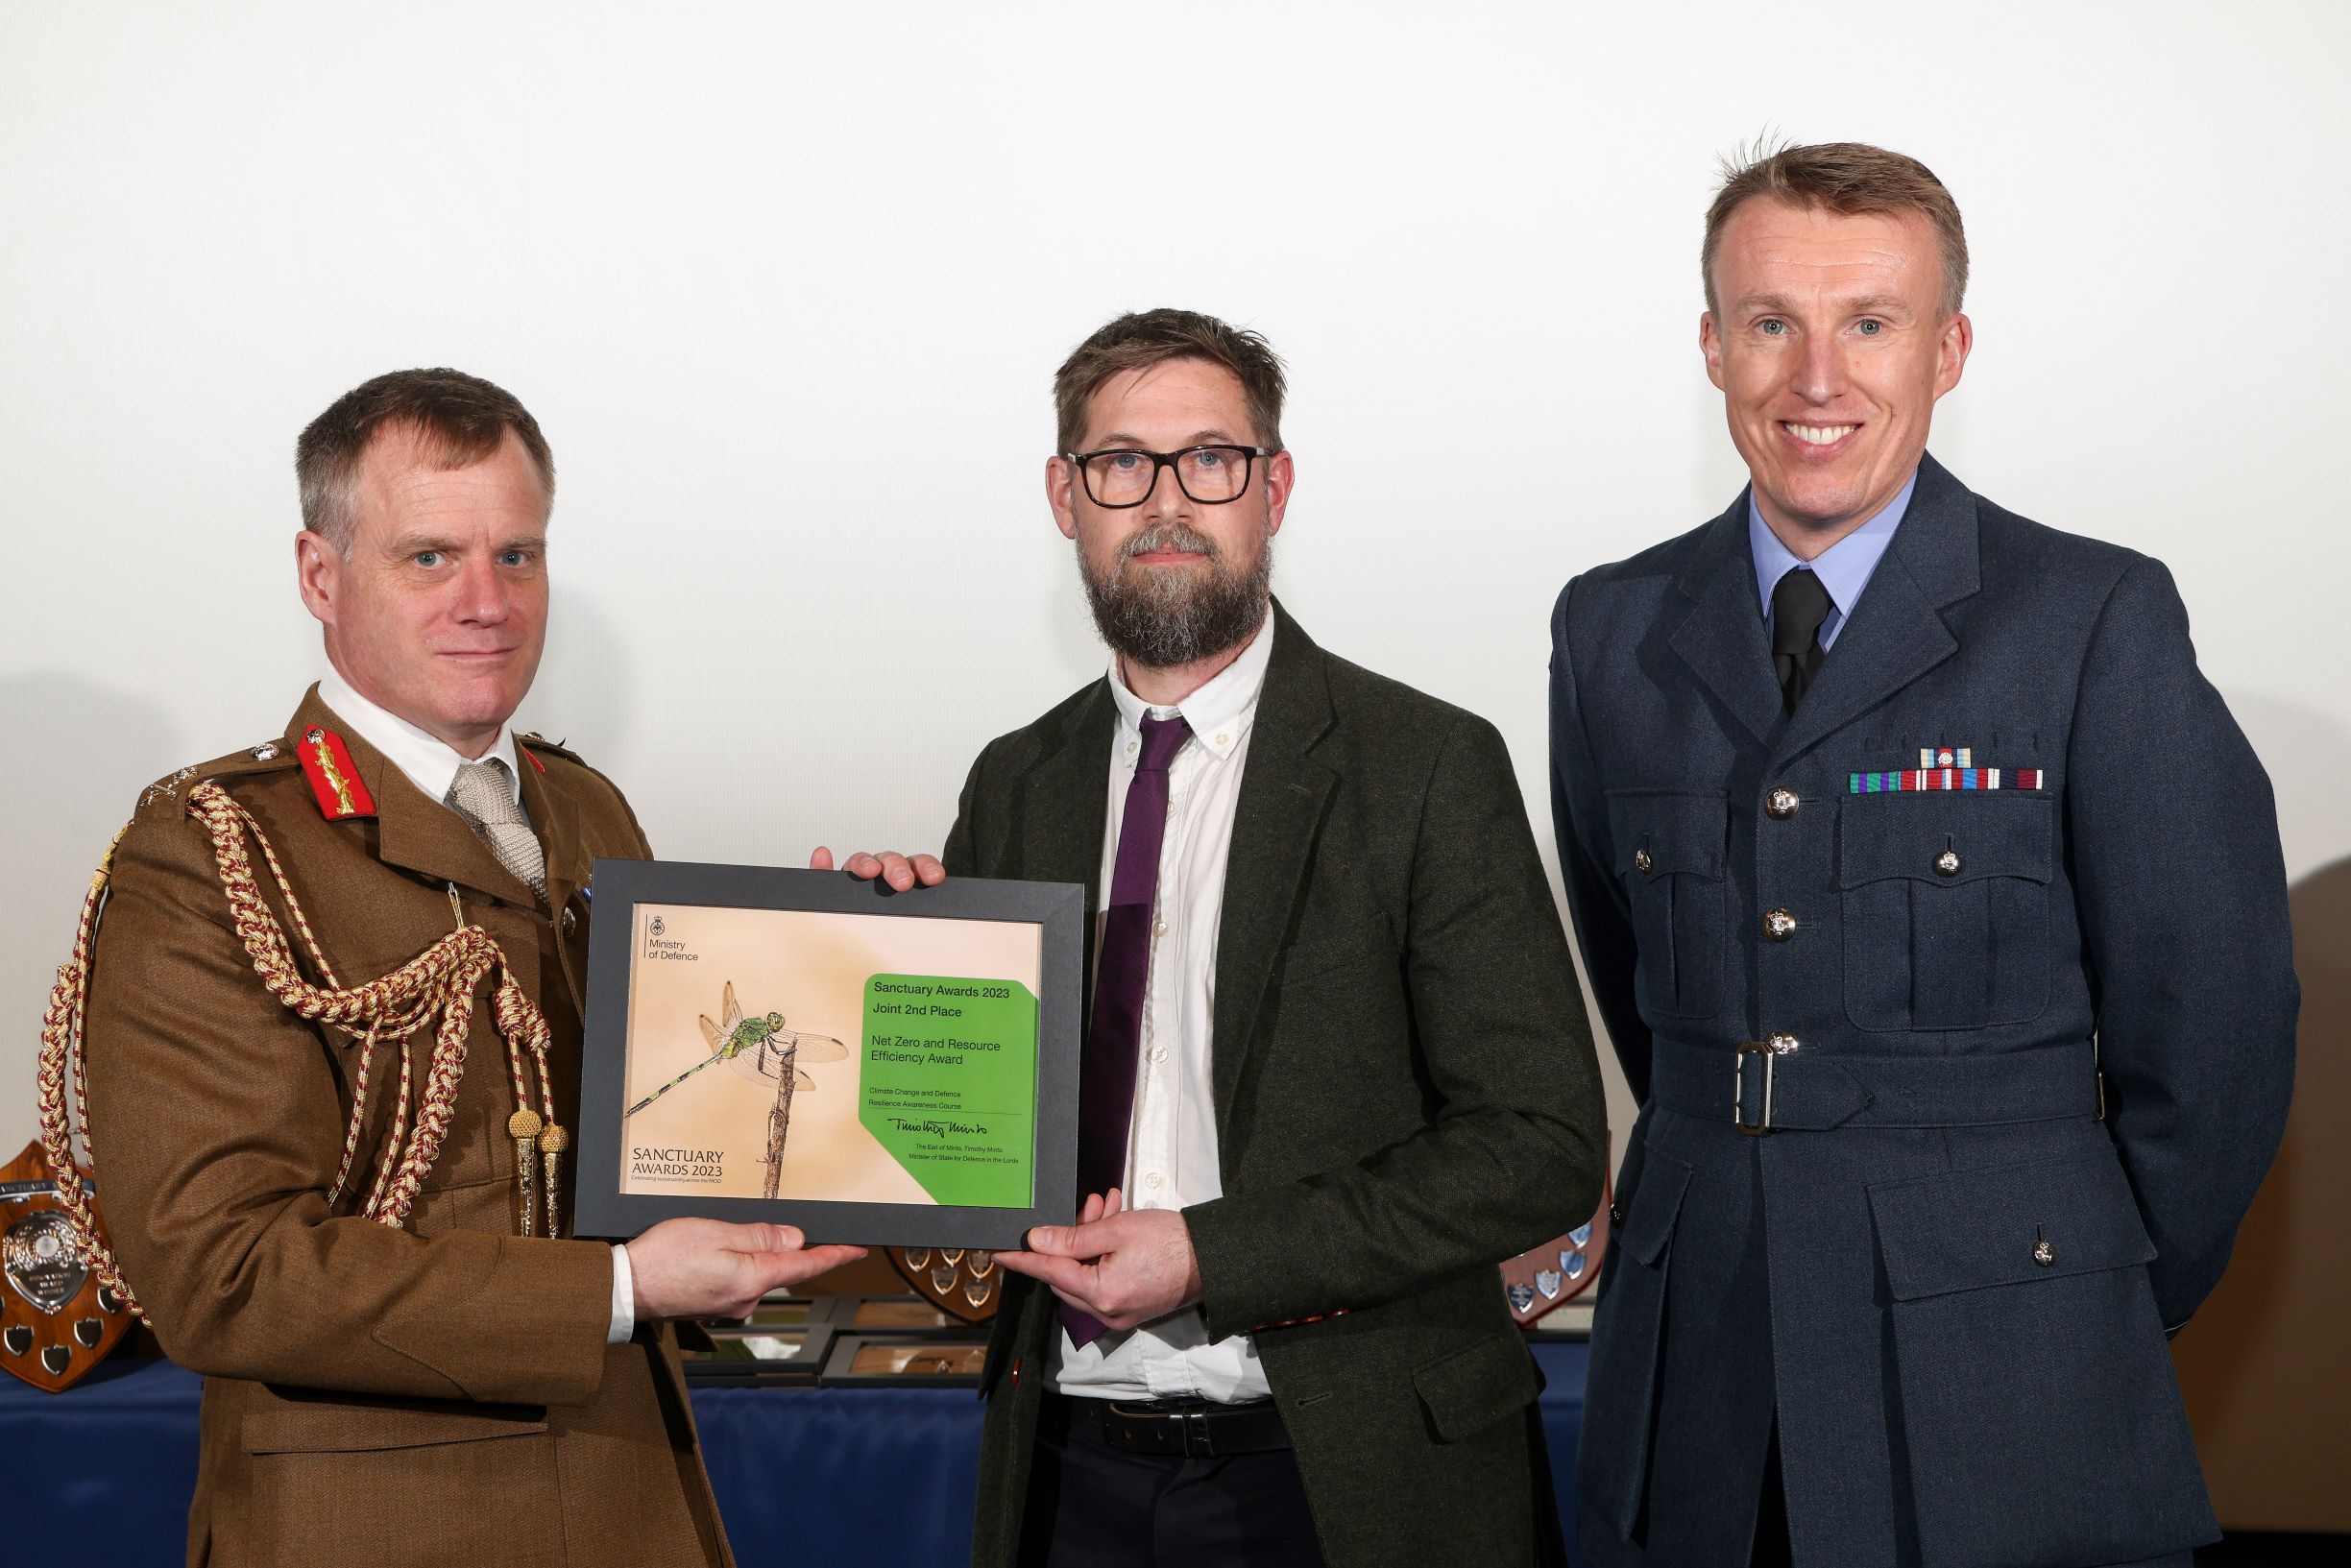 Army officer, civil servant and RAF officer holding Sanctuary Awards Net Zero certificate.